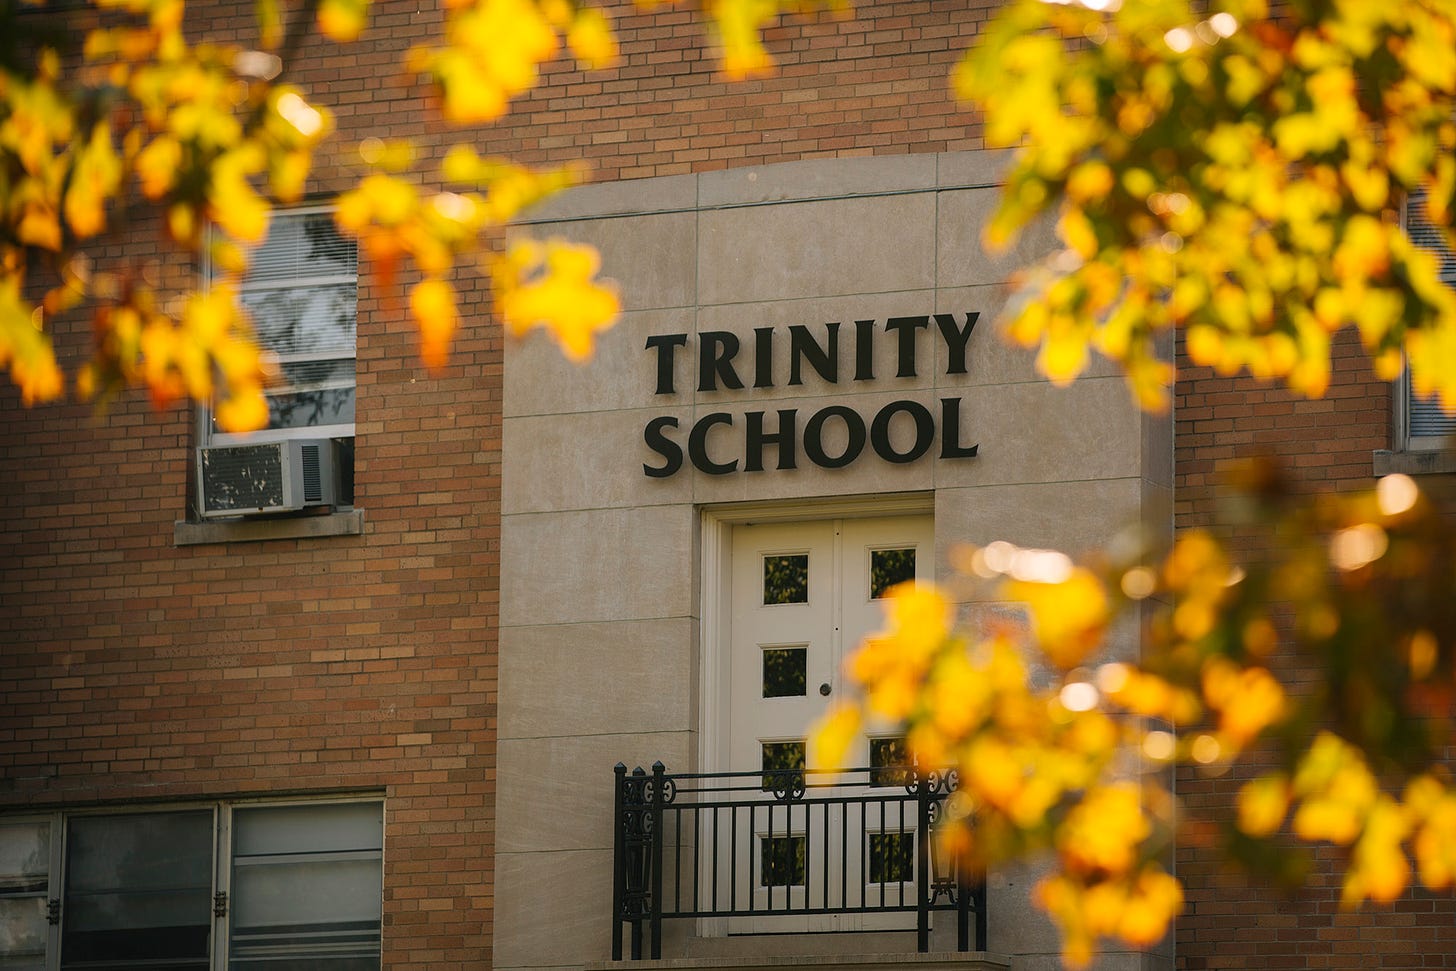 The Trinity School, where Amy Coney Barrett served as a board member on Friday, Sept. 25, 2020 in South Bend, Indiana. | Taylor Glascock for Politico Magazine